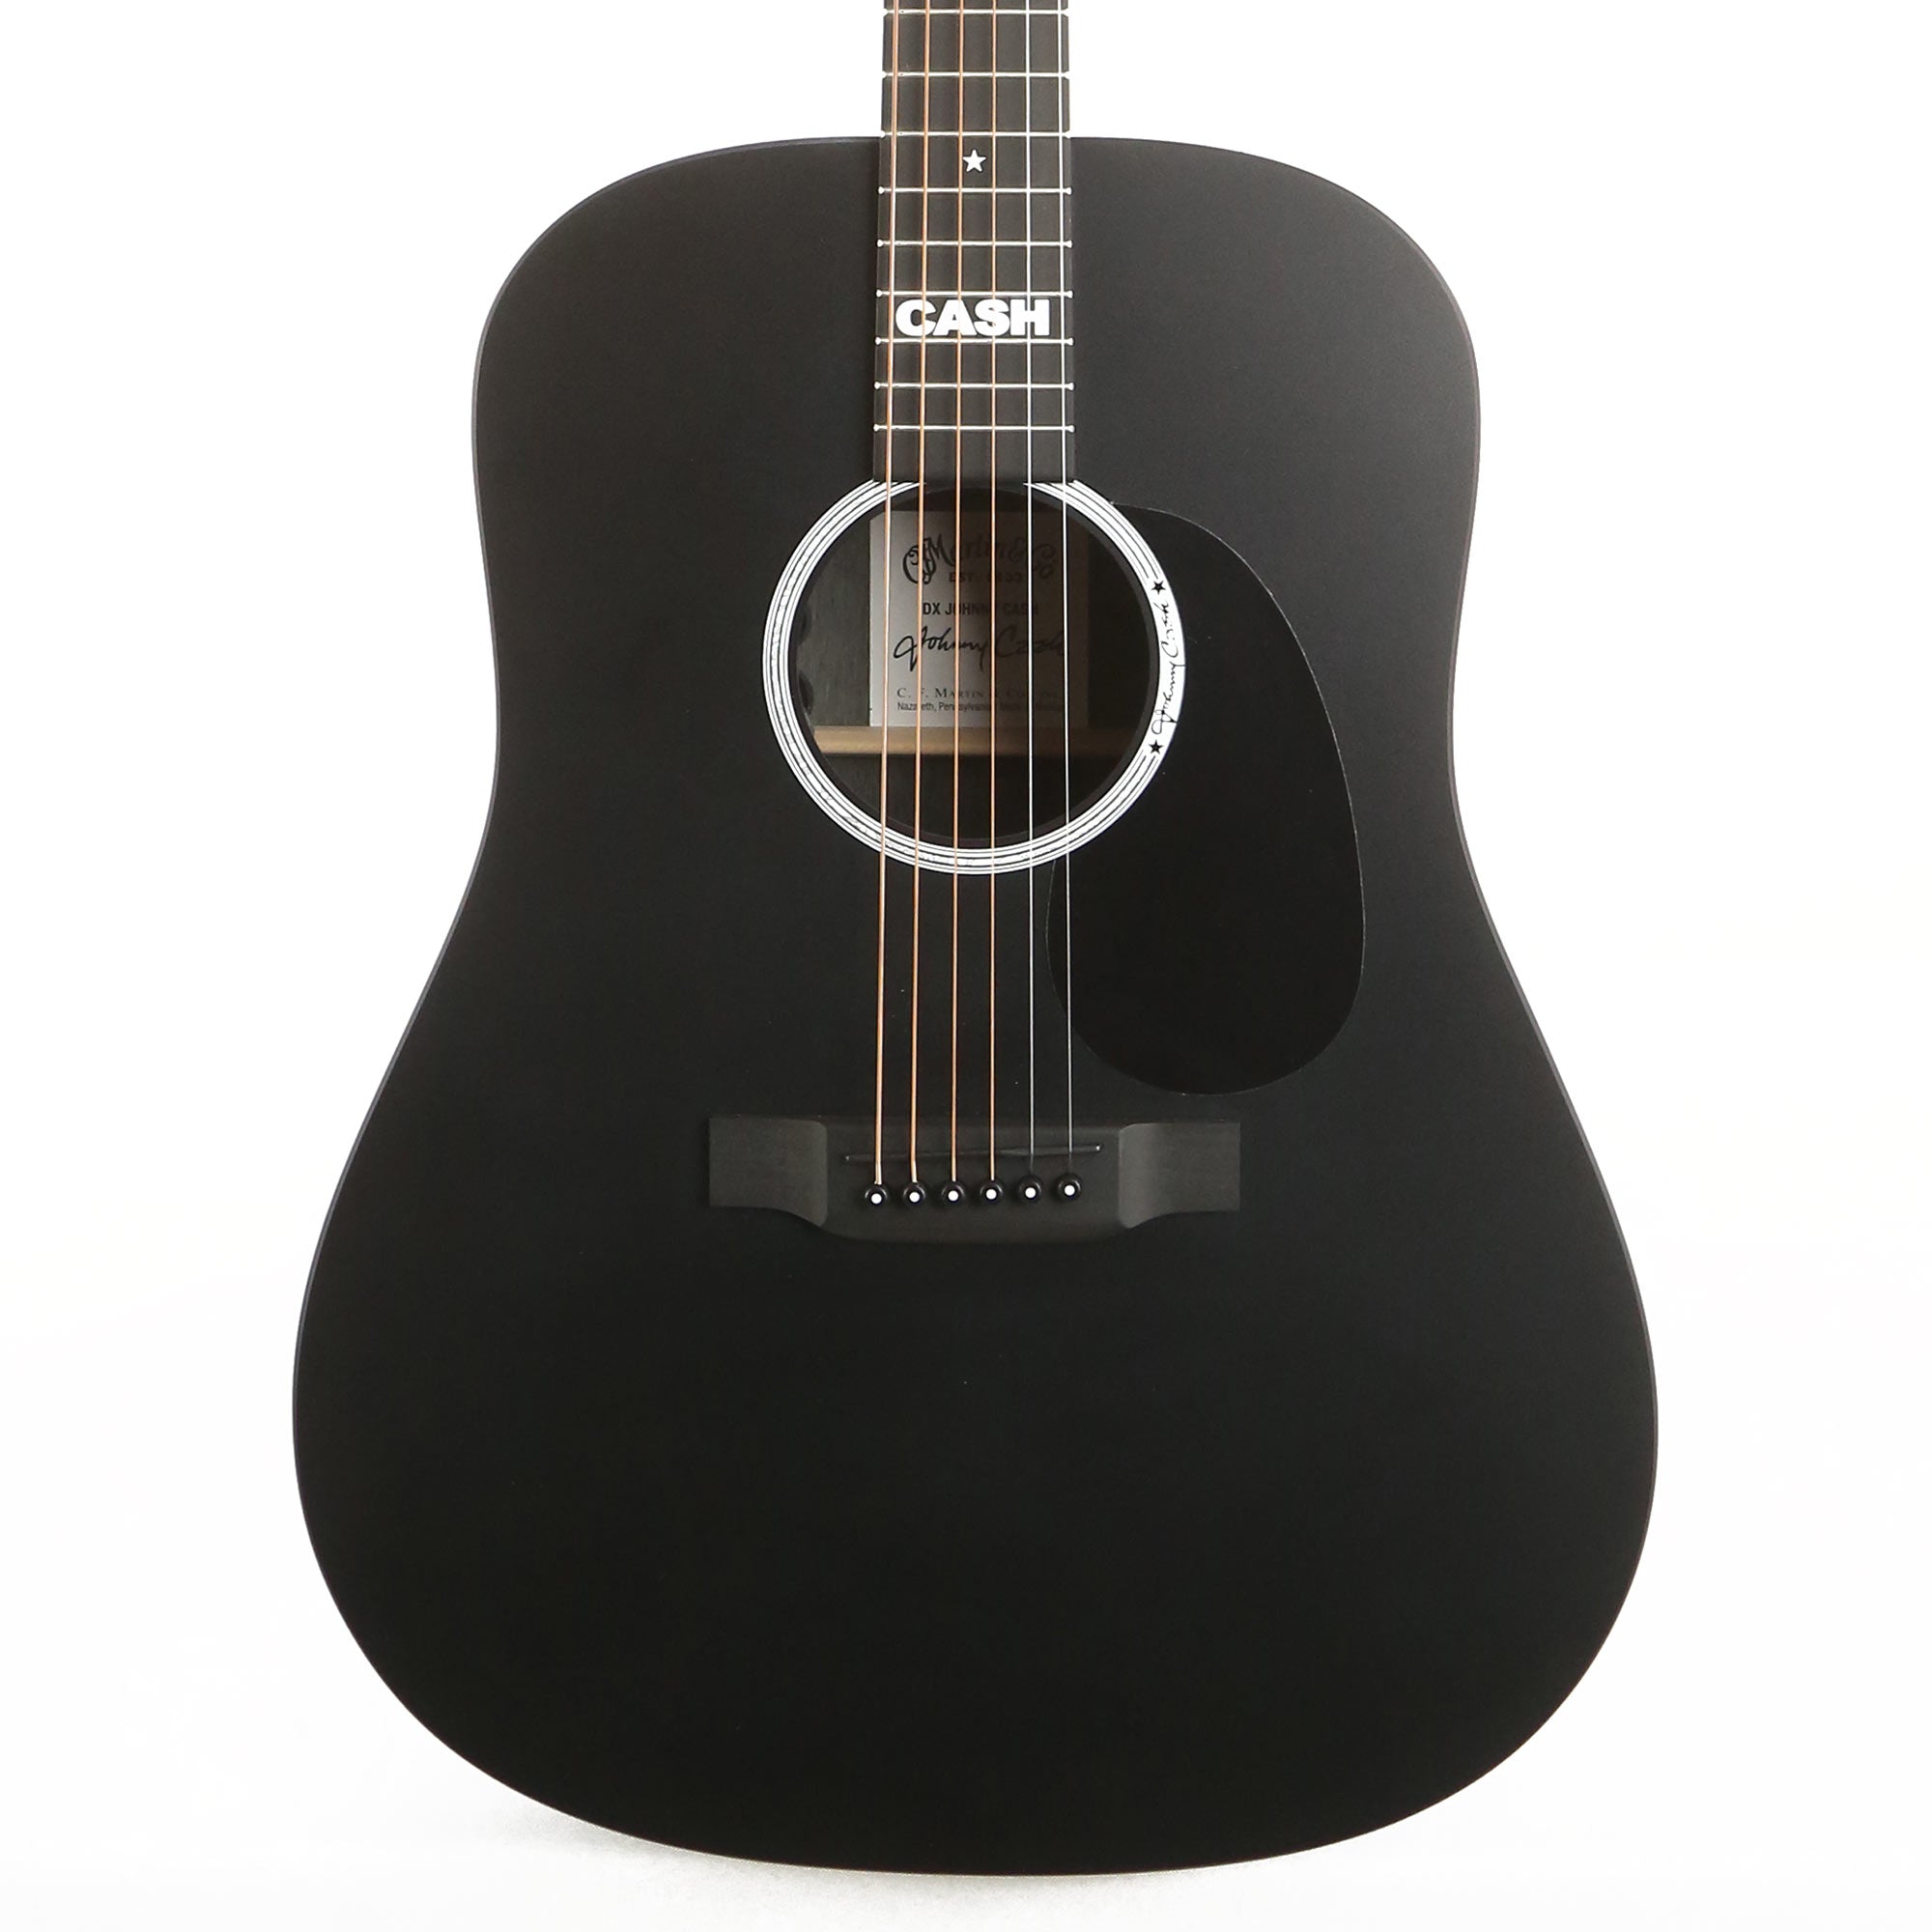 Martin DX Johnny Cash Acoustic-Electric Jett Black | The Music Zoo